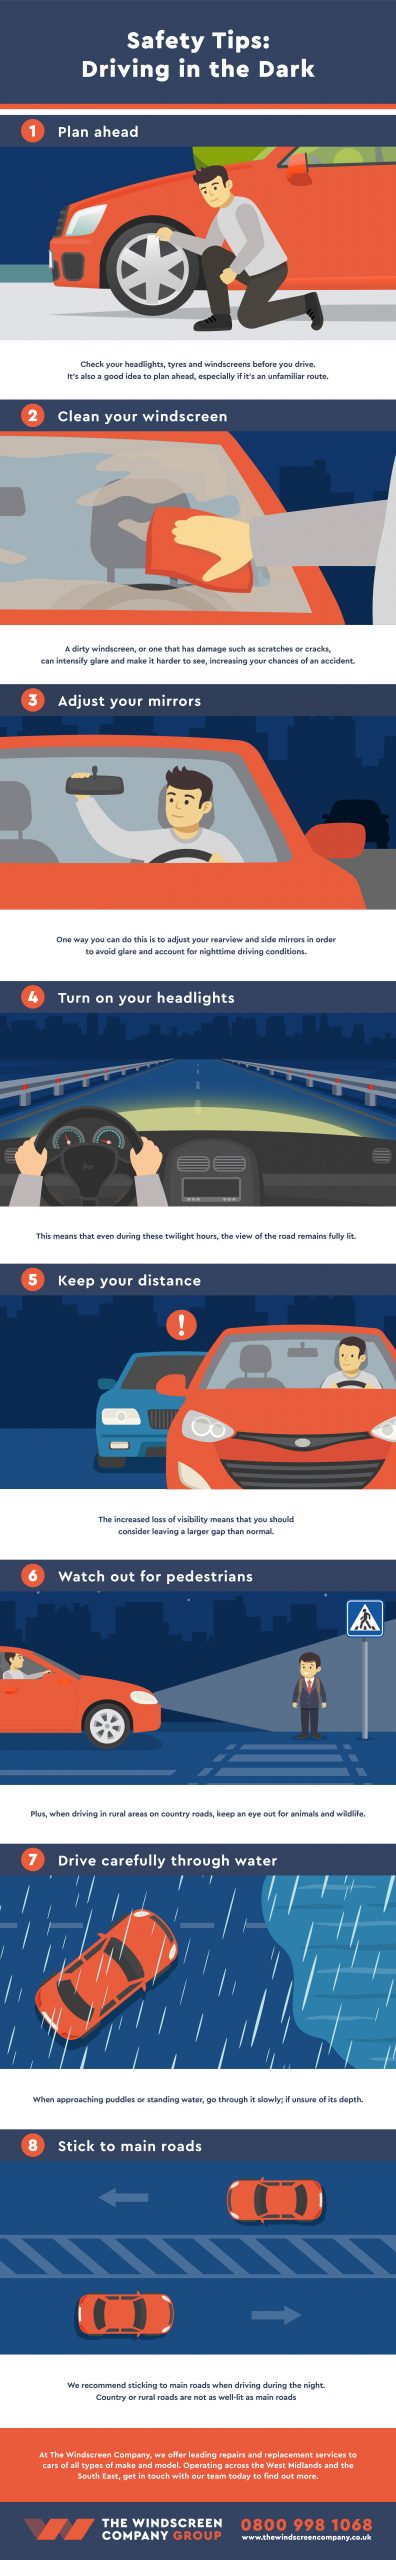 Safety Tips Driving in the Dark